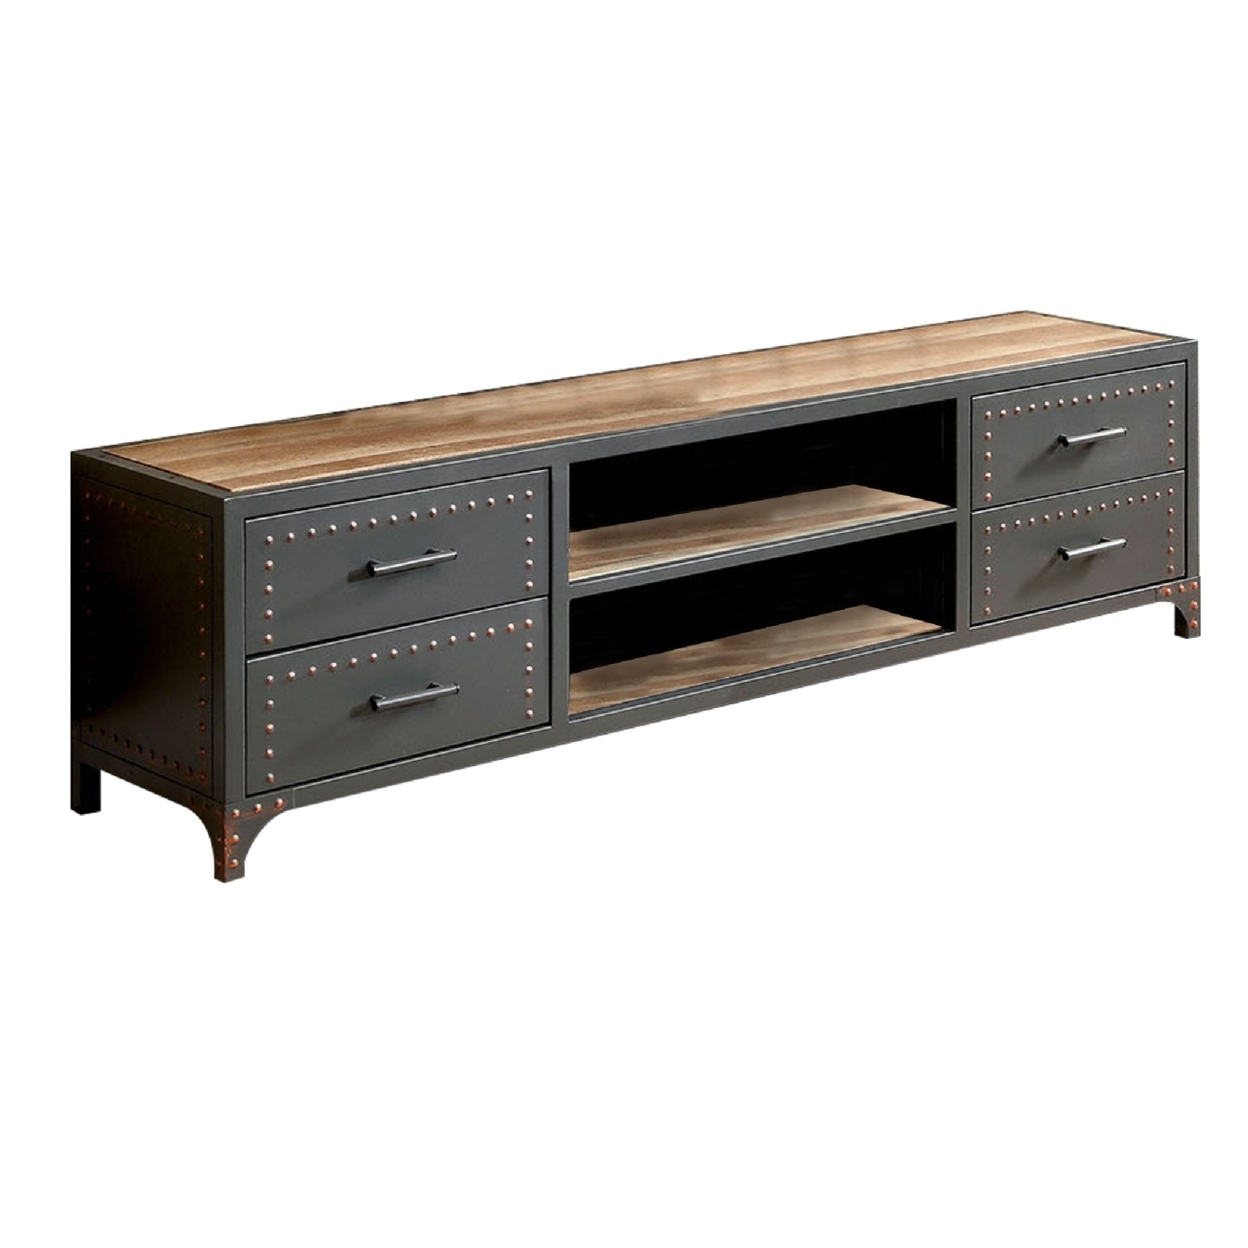 60 Wooden TV Stand With 4 Drawers And 2 Open Shelves In Gray- Saltoro Sherpi